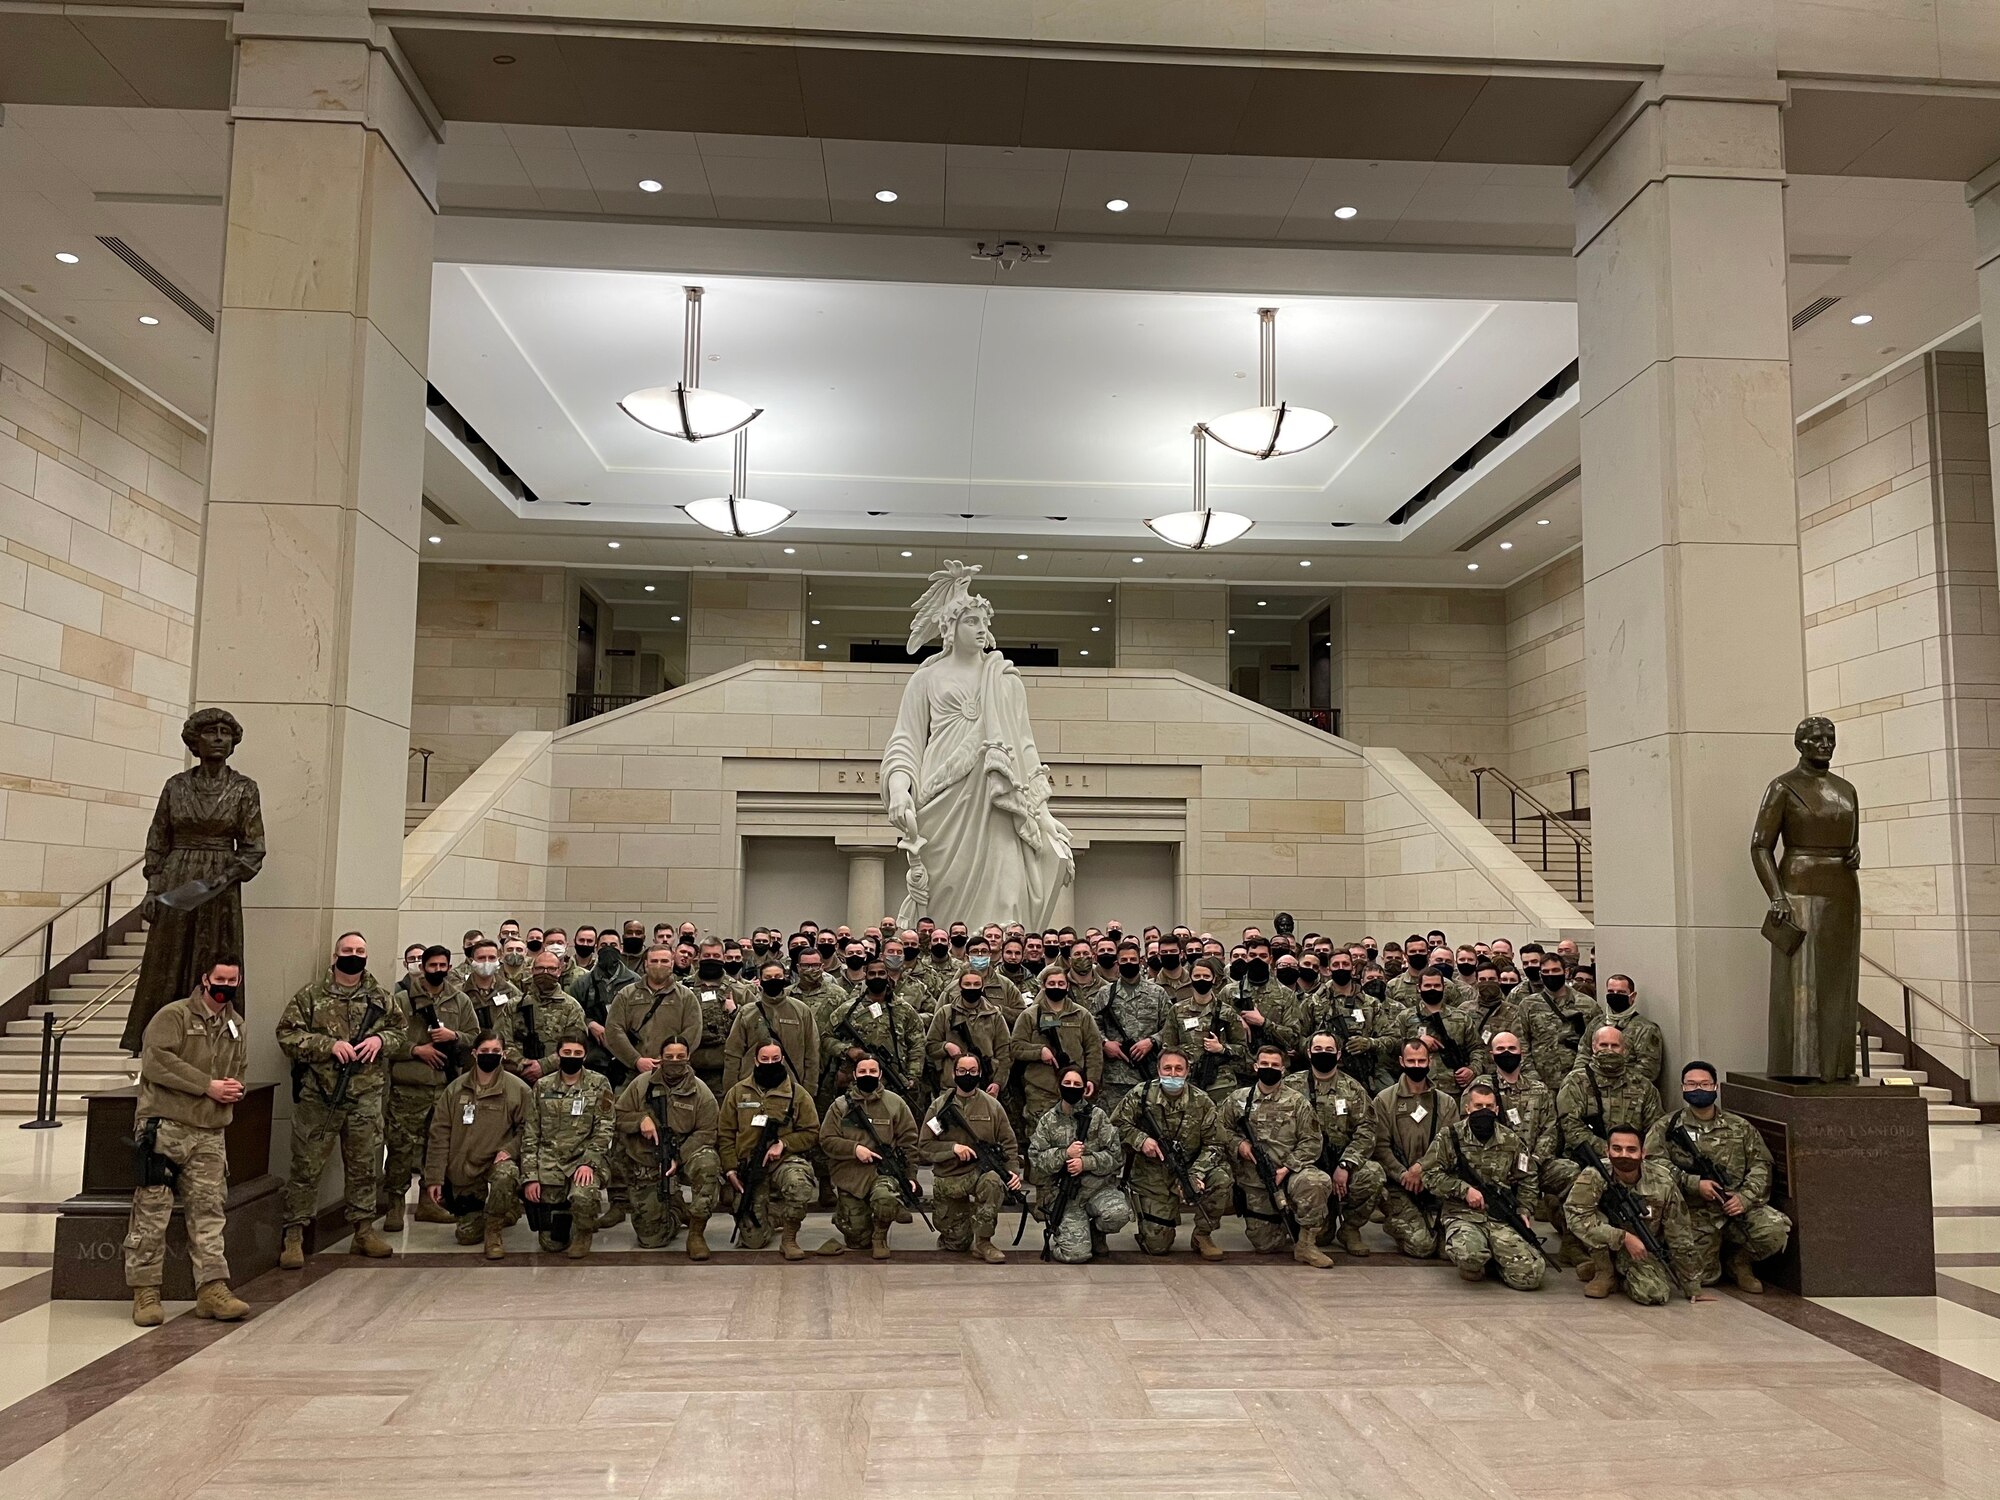 Members from the 128th Air Refueling Wing along with the rest of Sijan Company pose for a group photo on the U.S. Capitol grounds Jan. 19, 2021. In the days leading up to the 59th presidential inauguration more than 125 Wisconsin Airmen from the 128th Air Refueling Wing, 115th Fighter Wing and Volk Field Combat Readiness Training Center mobilized to Washington D.C. to assist with security efforts for the event. (Courtesy Photo)